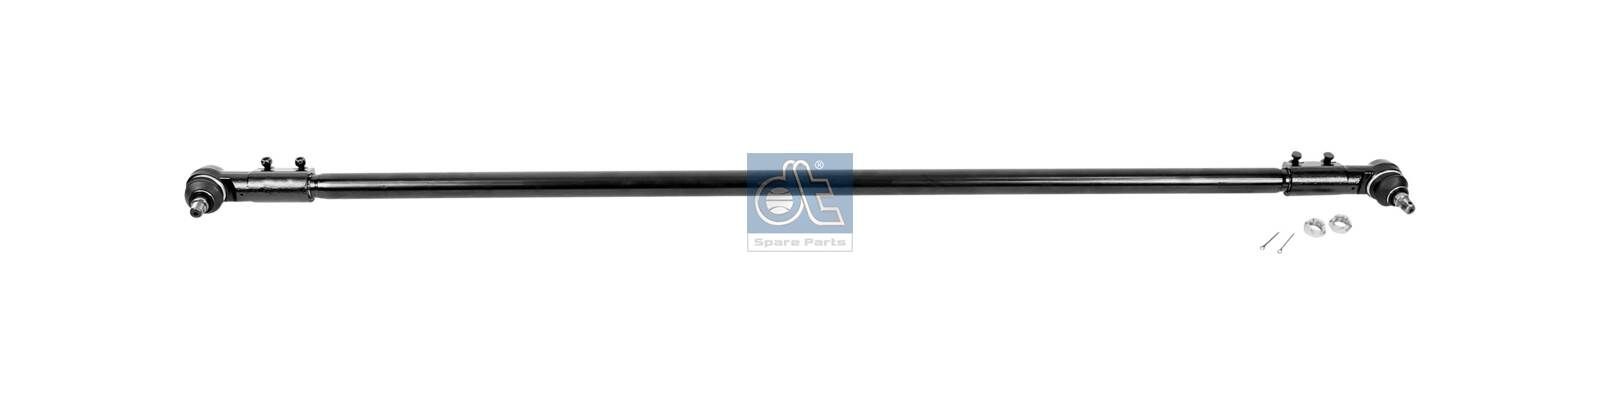 DT Spare Parts 4.65660 Rod Assembly 357 330 04 03